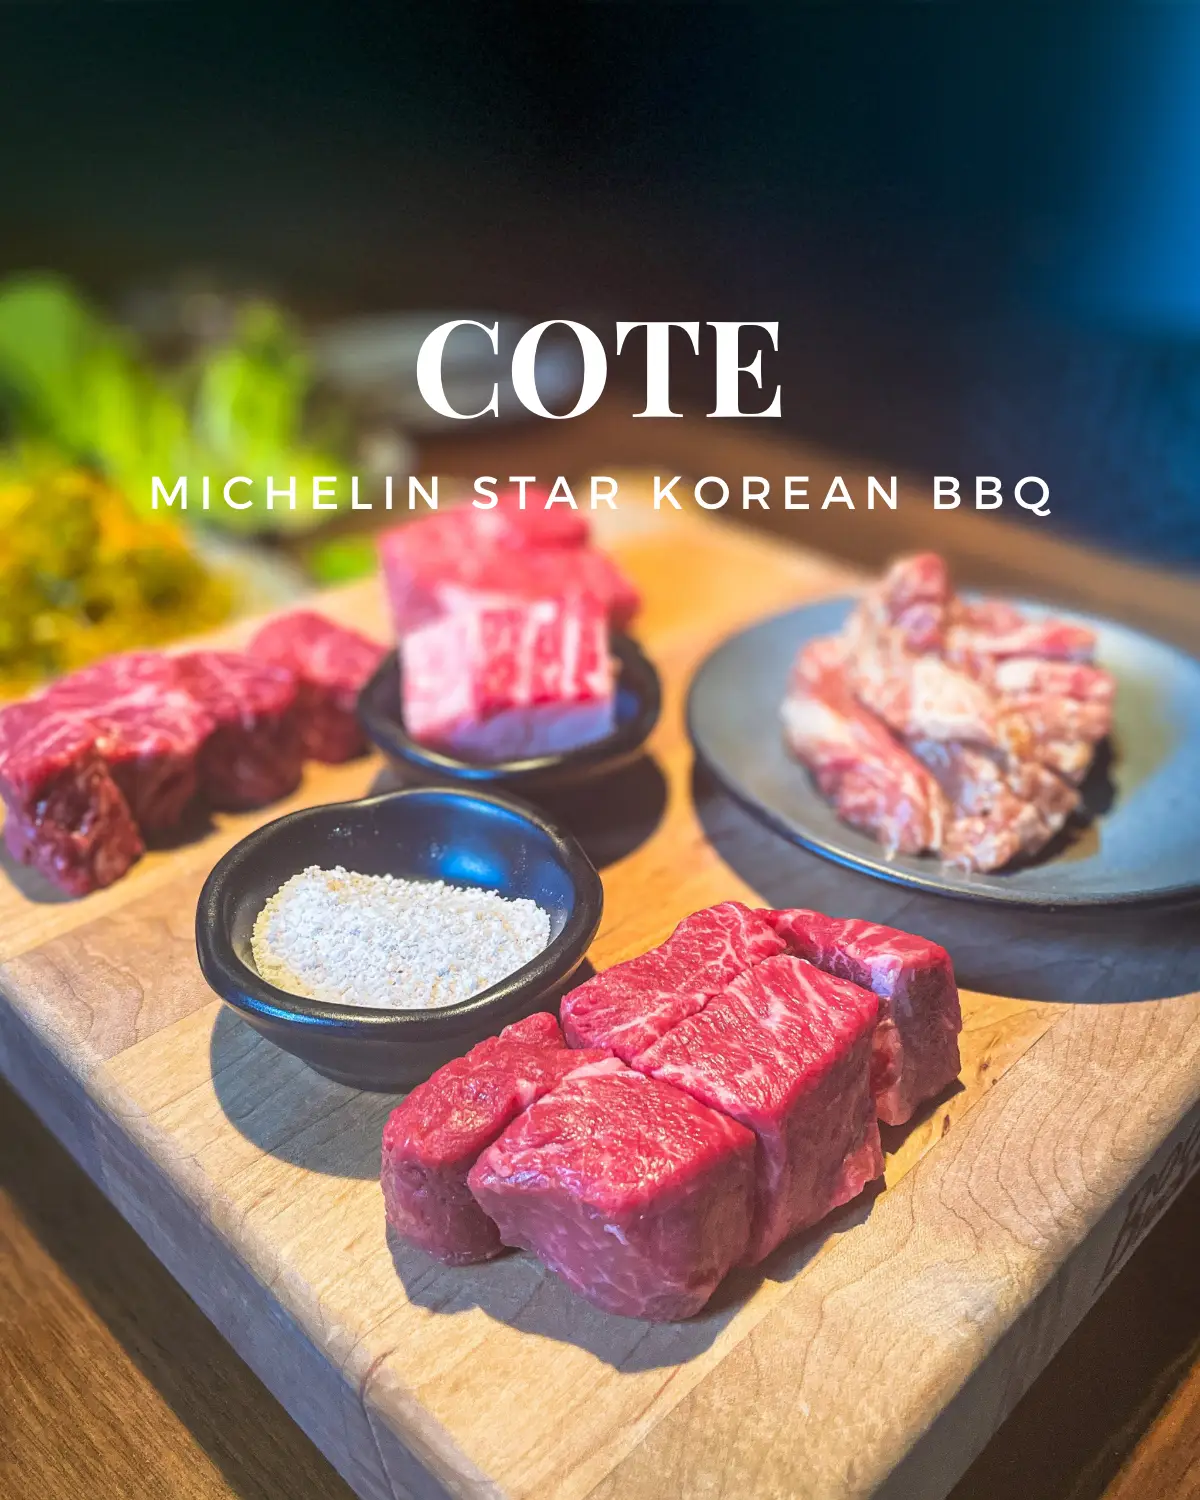 Cote 🥩 Michelin-star Korean BBQ in NYC's images